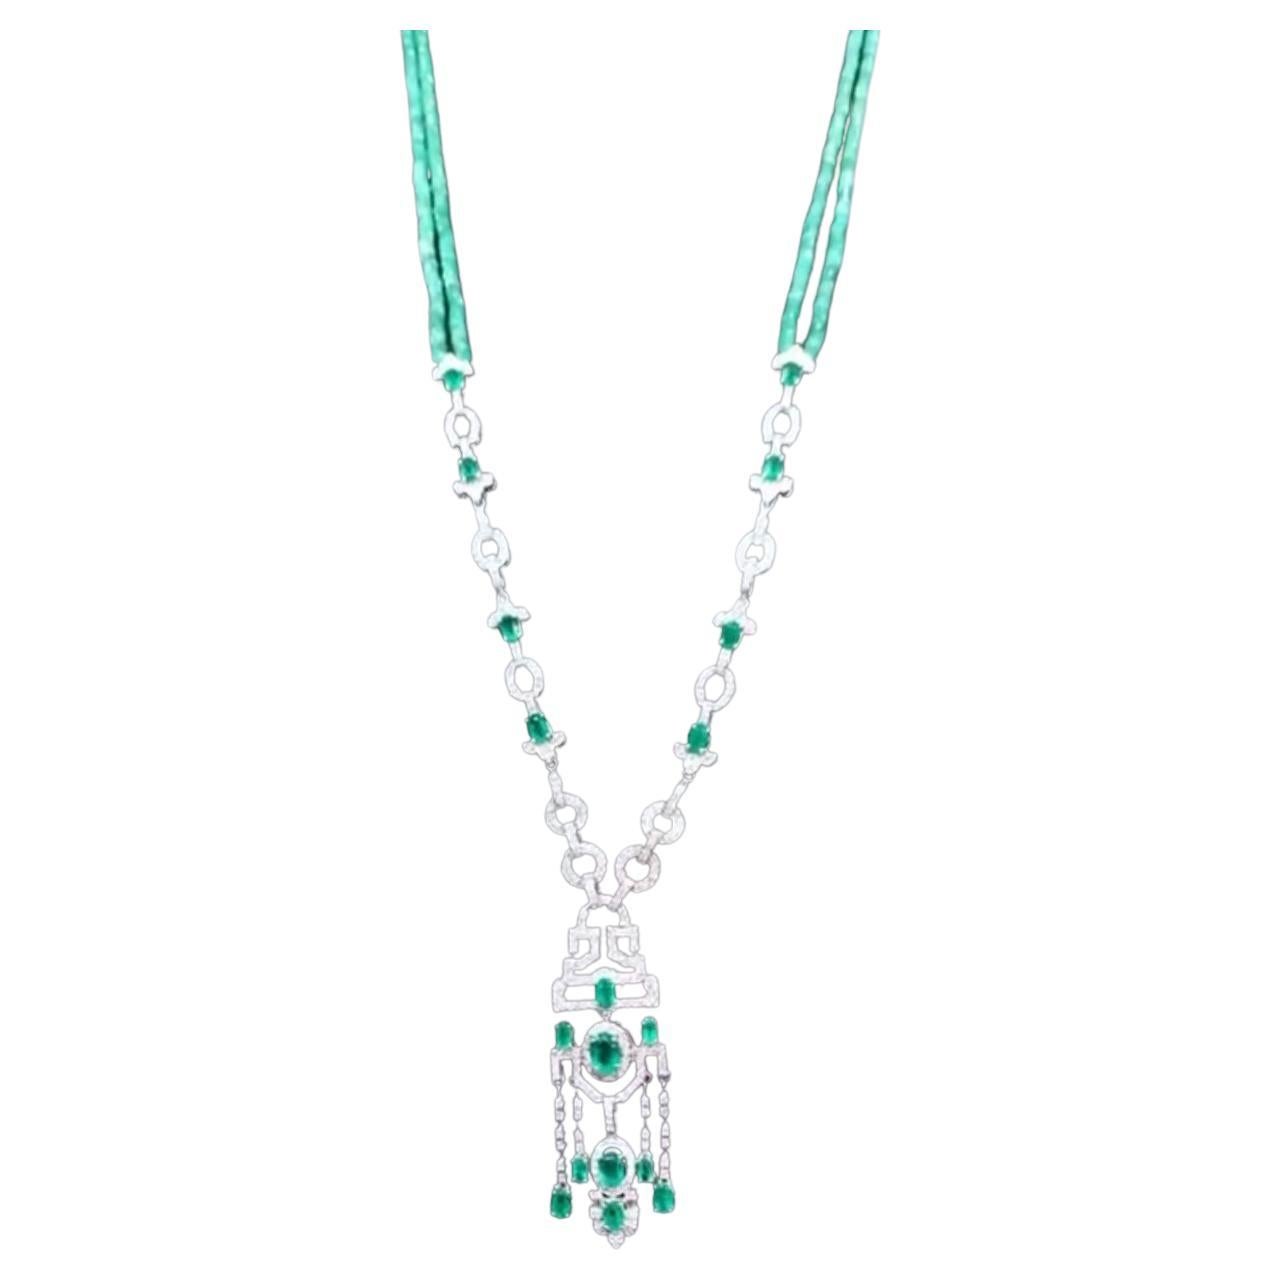 Amazing Art Deco Design with 15.65 Carats of Emeralds and Diamonds on Necklace For Sale